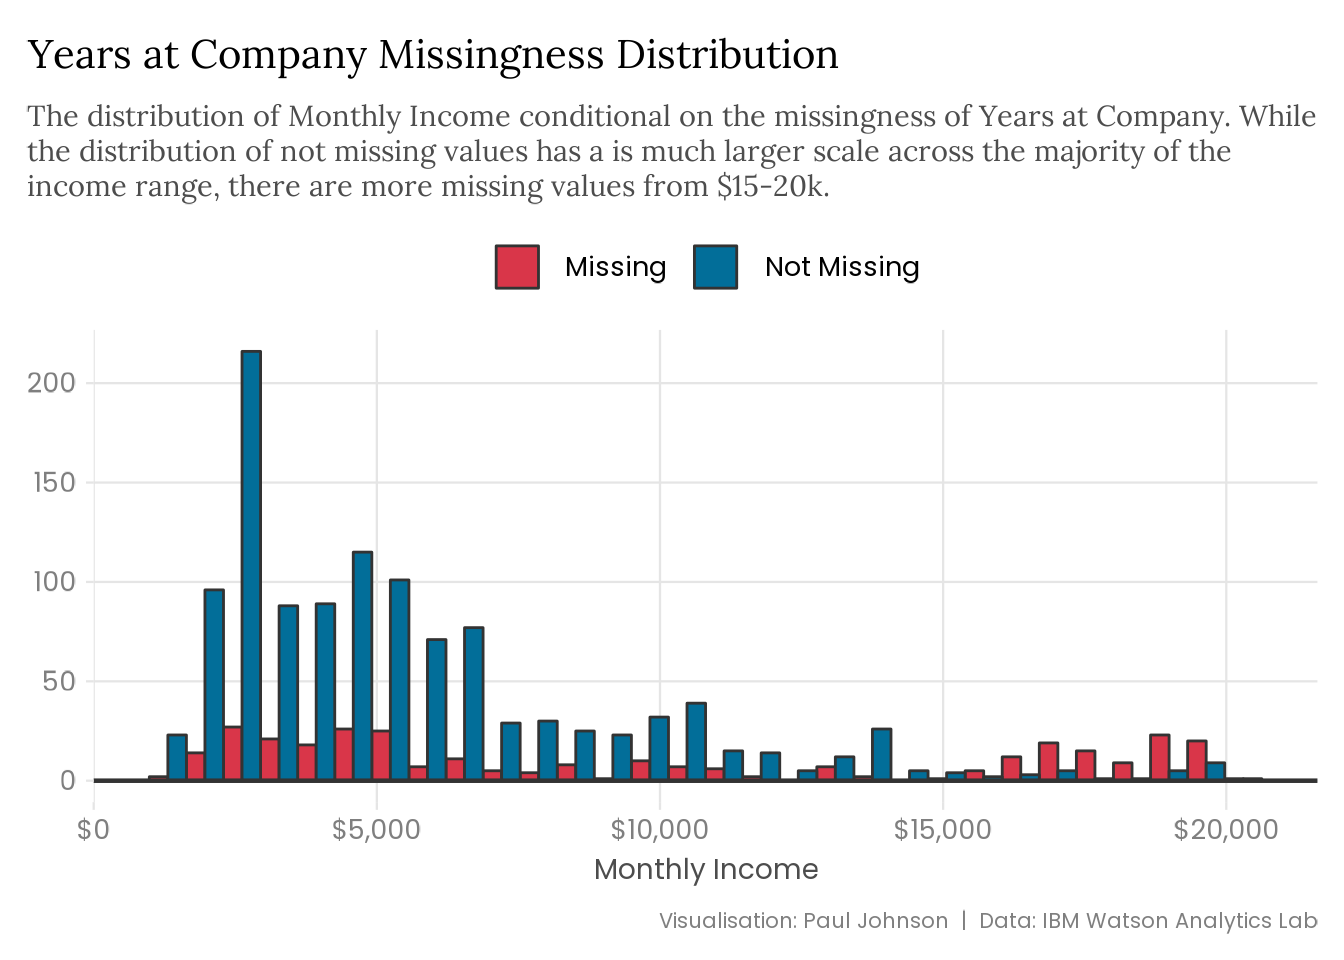 A histogram visualising the distribution of employee monthly income, conditional on whether years at company is missing or not. The histogram shows a distribution in blue, representing the values that are not missing, which is much larger than the red distribution, representing the missing values. While the scale of the distributions differ, the shapes are similar. However, at the highest values of monthly income, over $15,000, there are more missing values than not missing values. 